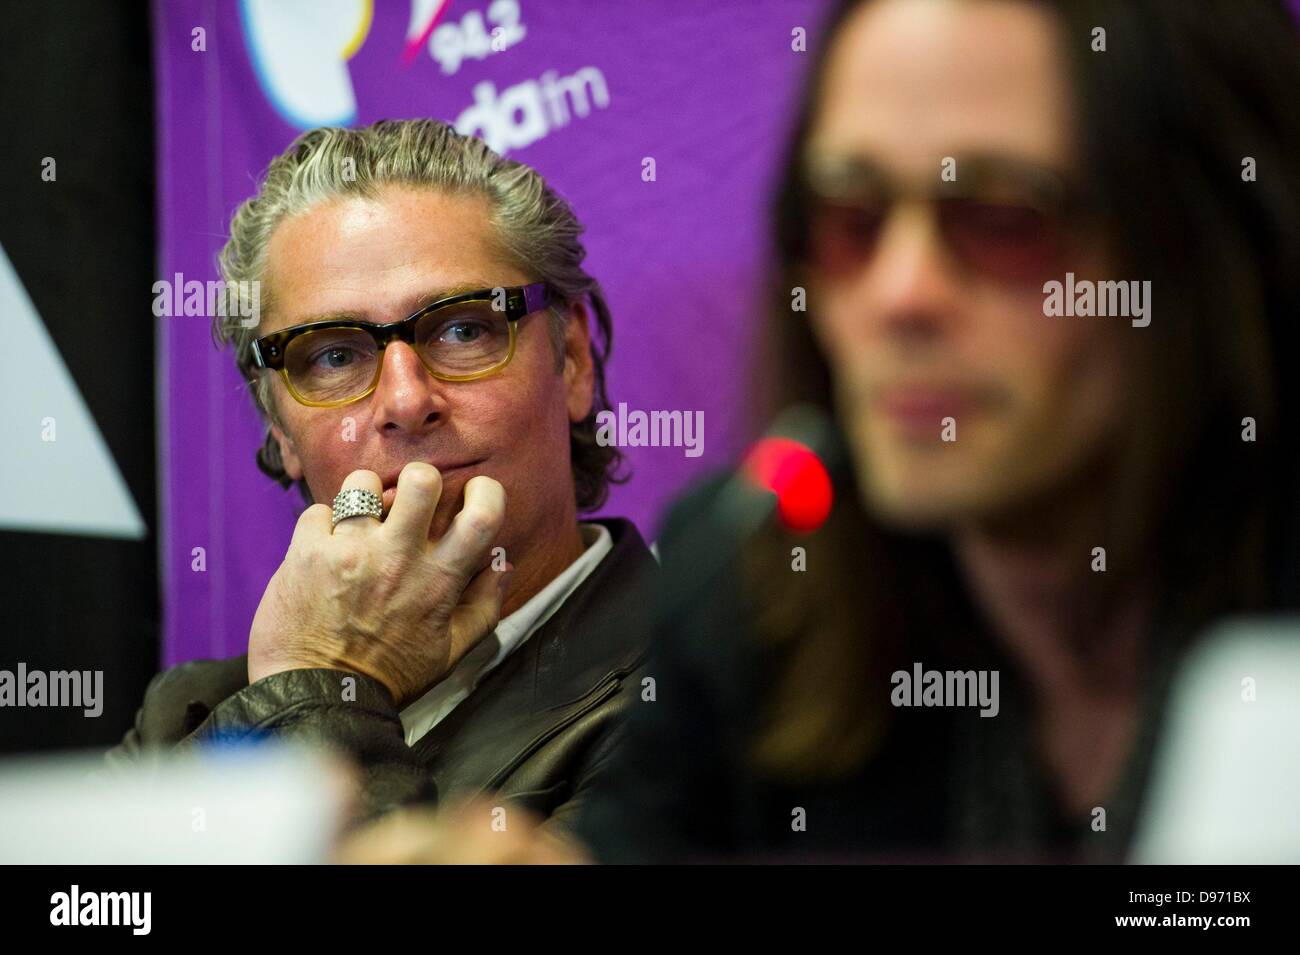 Johannesburg, South Africa. June 12, 2013.  Ed Roland and Myles Kennedy at the Jacaranda FM studios on June 12, 2013, in Johannesburg, South Africa. Kings of Chaos performed in Cape Town on June 8, 2013 and are set to perform in Johannesburg on June 15 and 16, 2013. Credit:  Gallo images/Alamy Live News Stock Photo